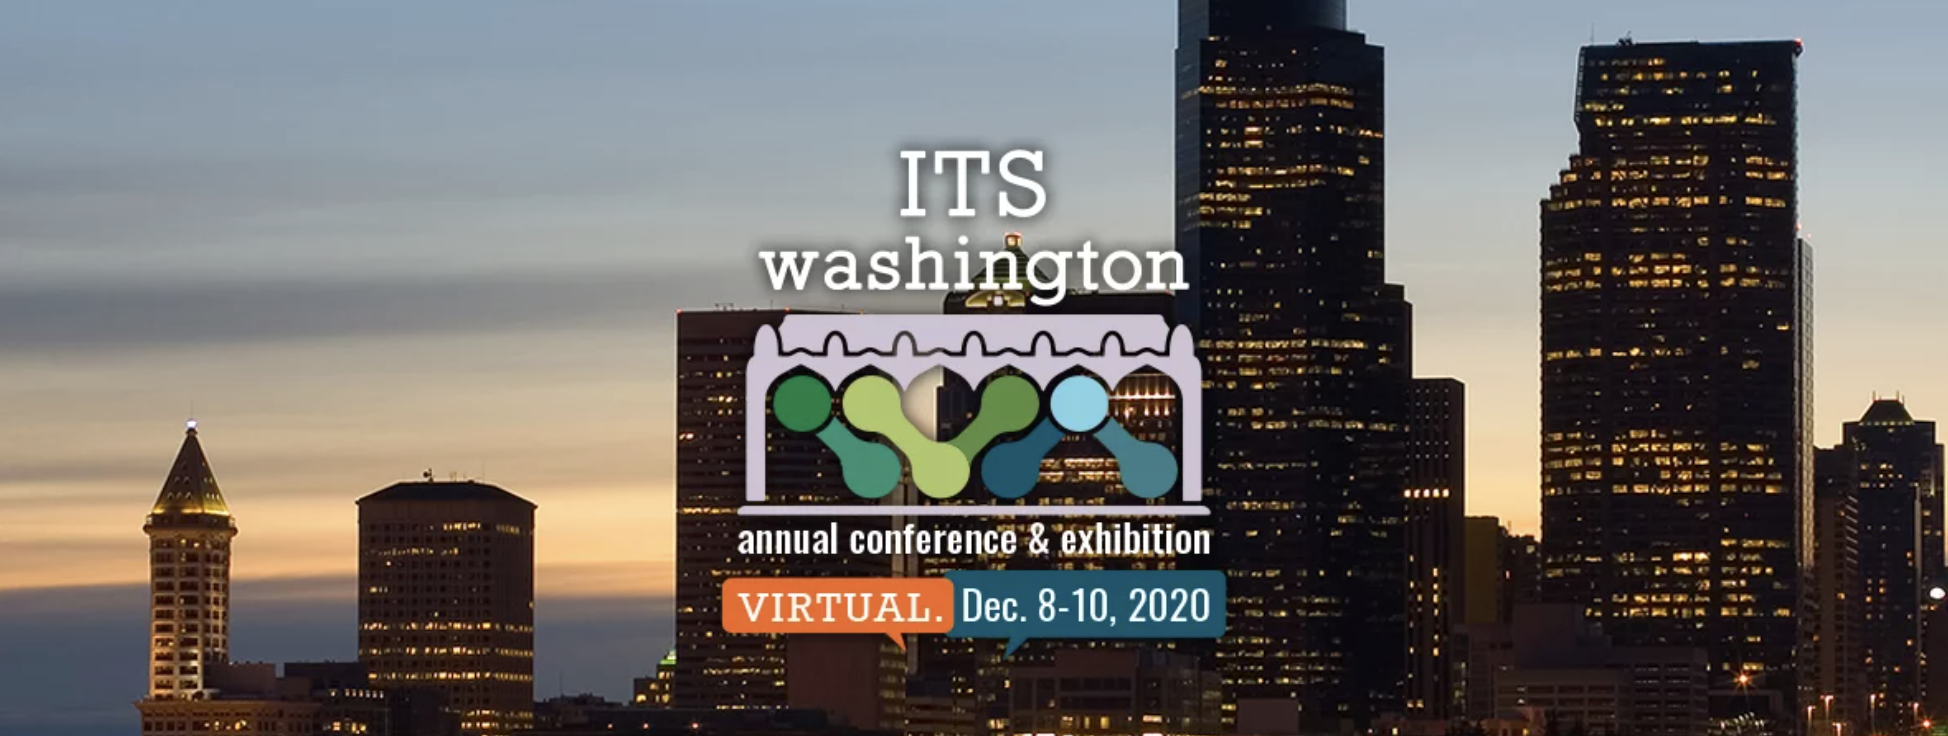 ITS Washington Annual Conference | Technical Panel 